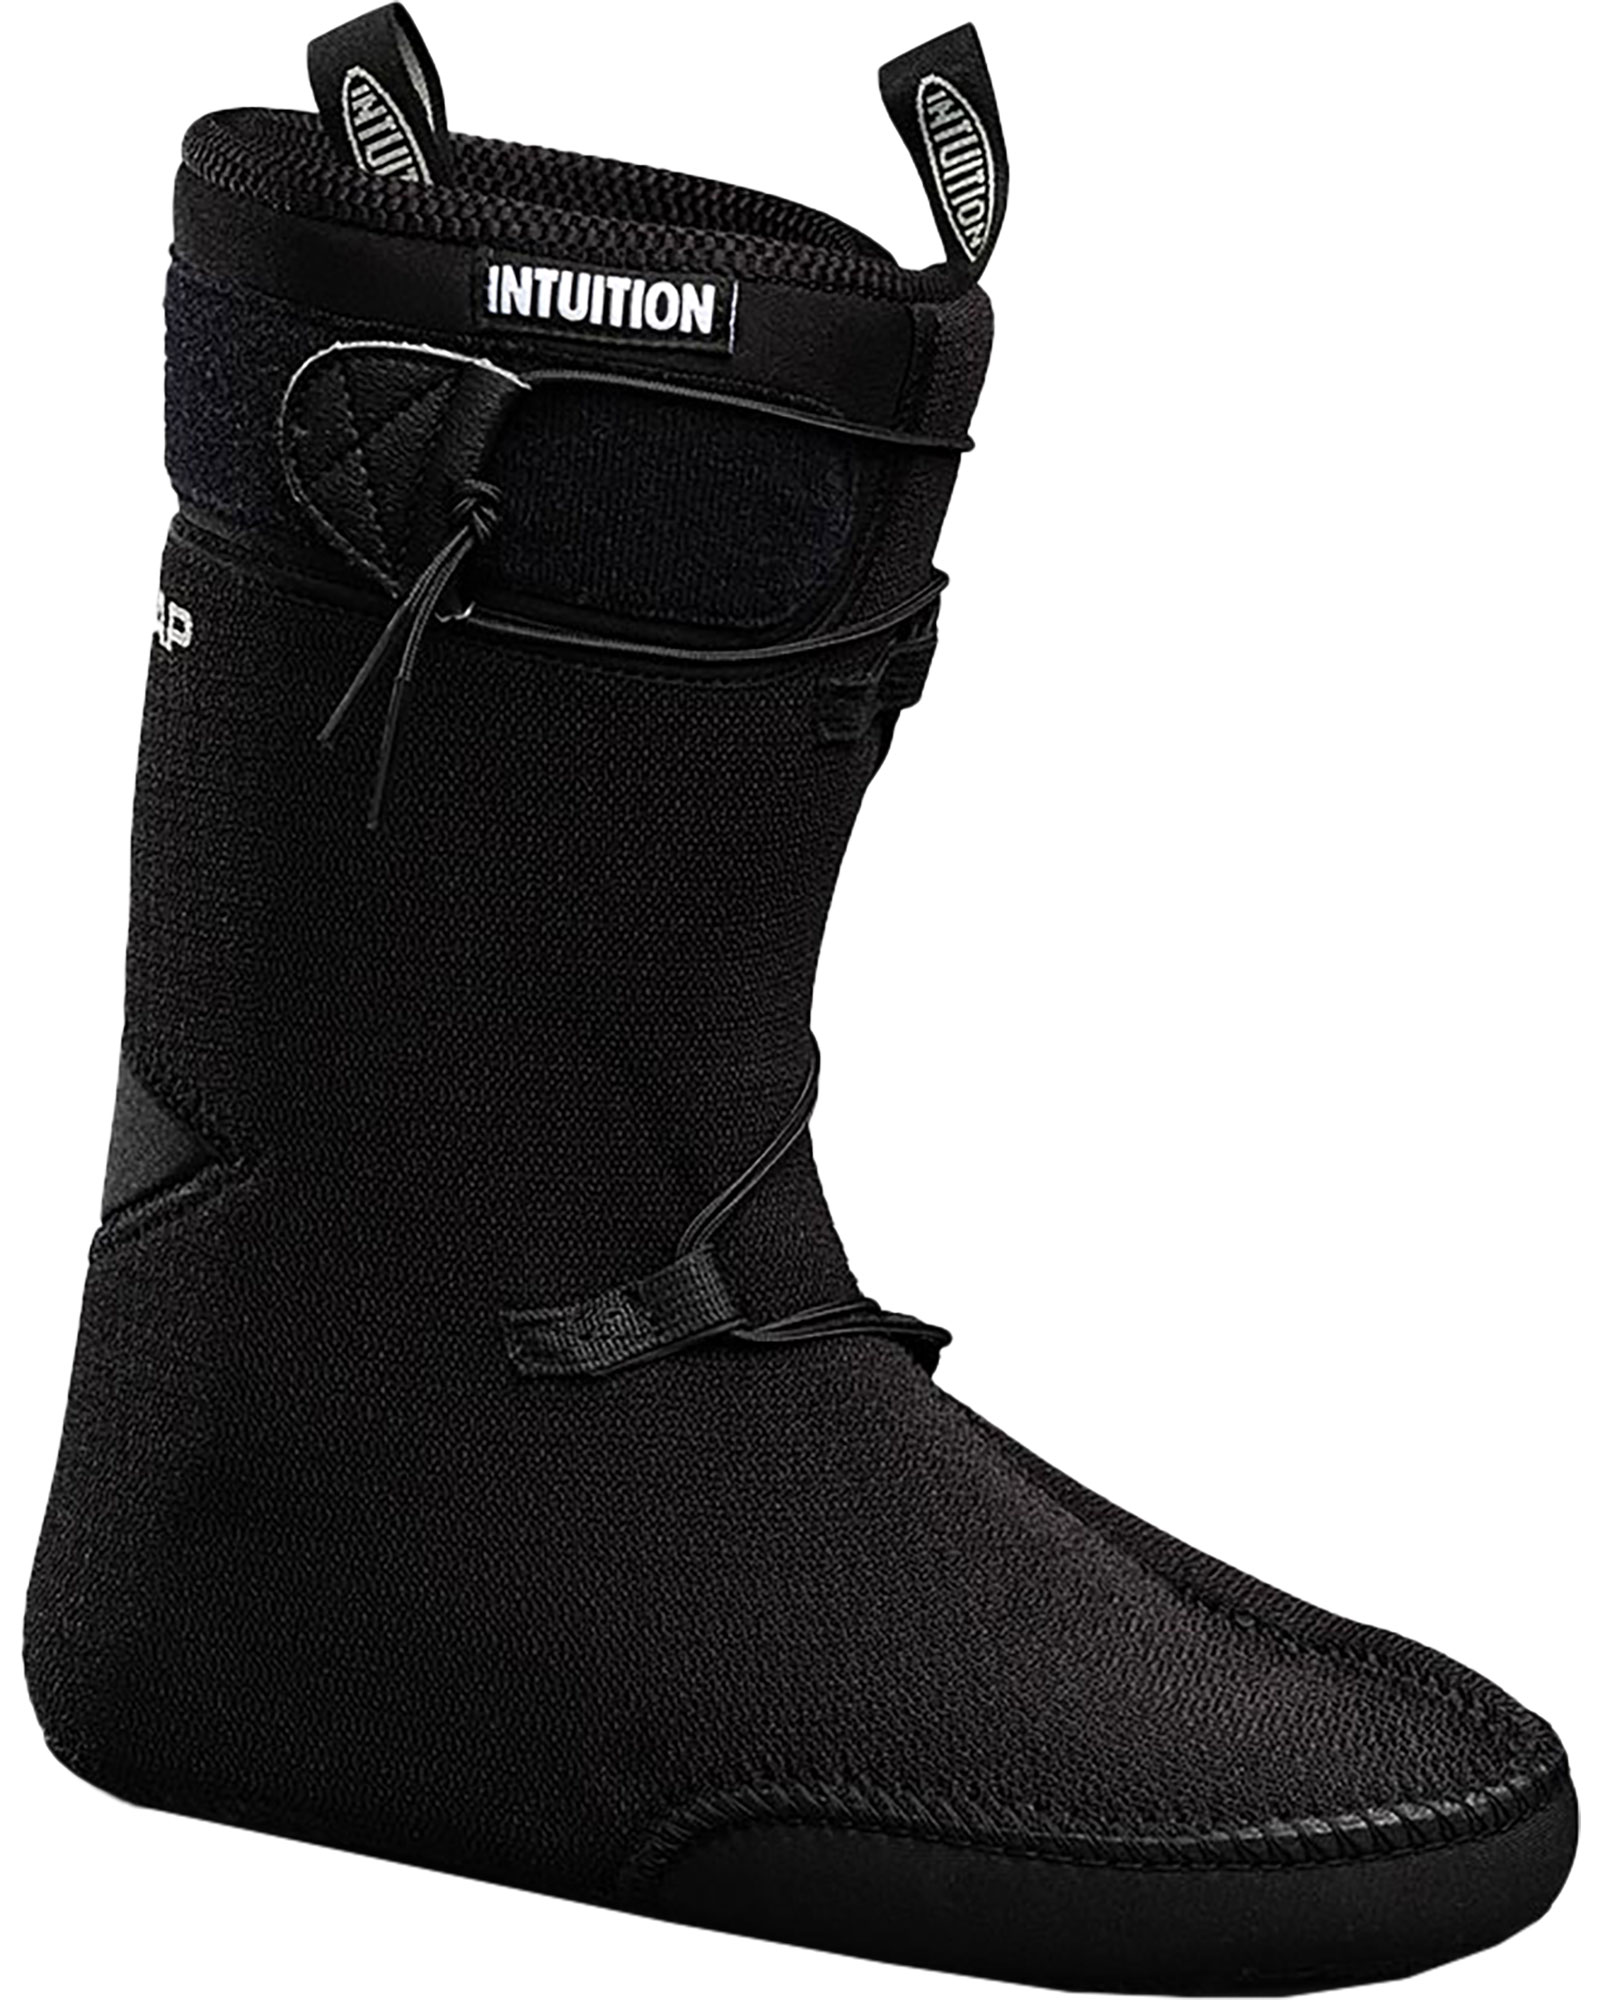 Intuition Tour Wrap Boot Liners